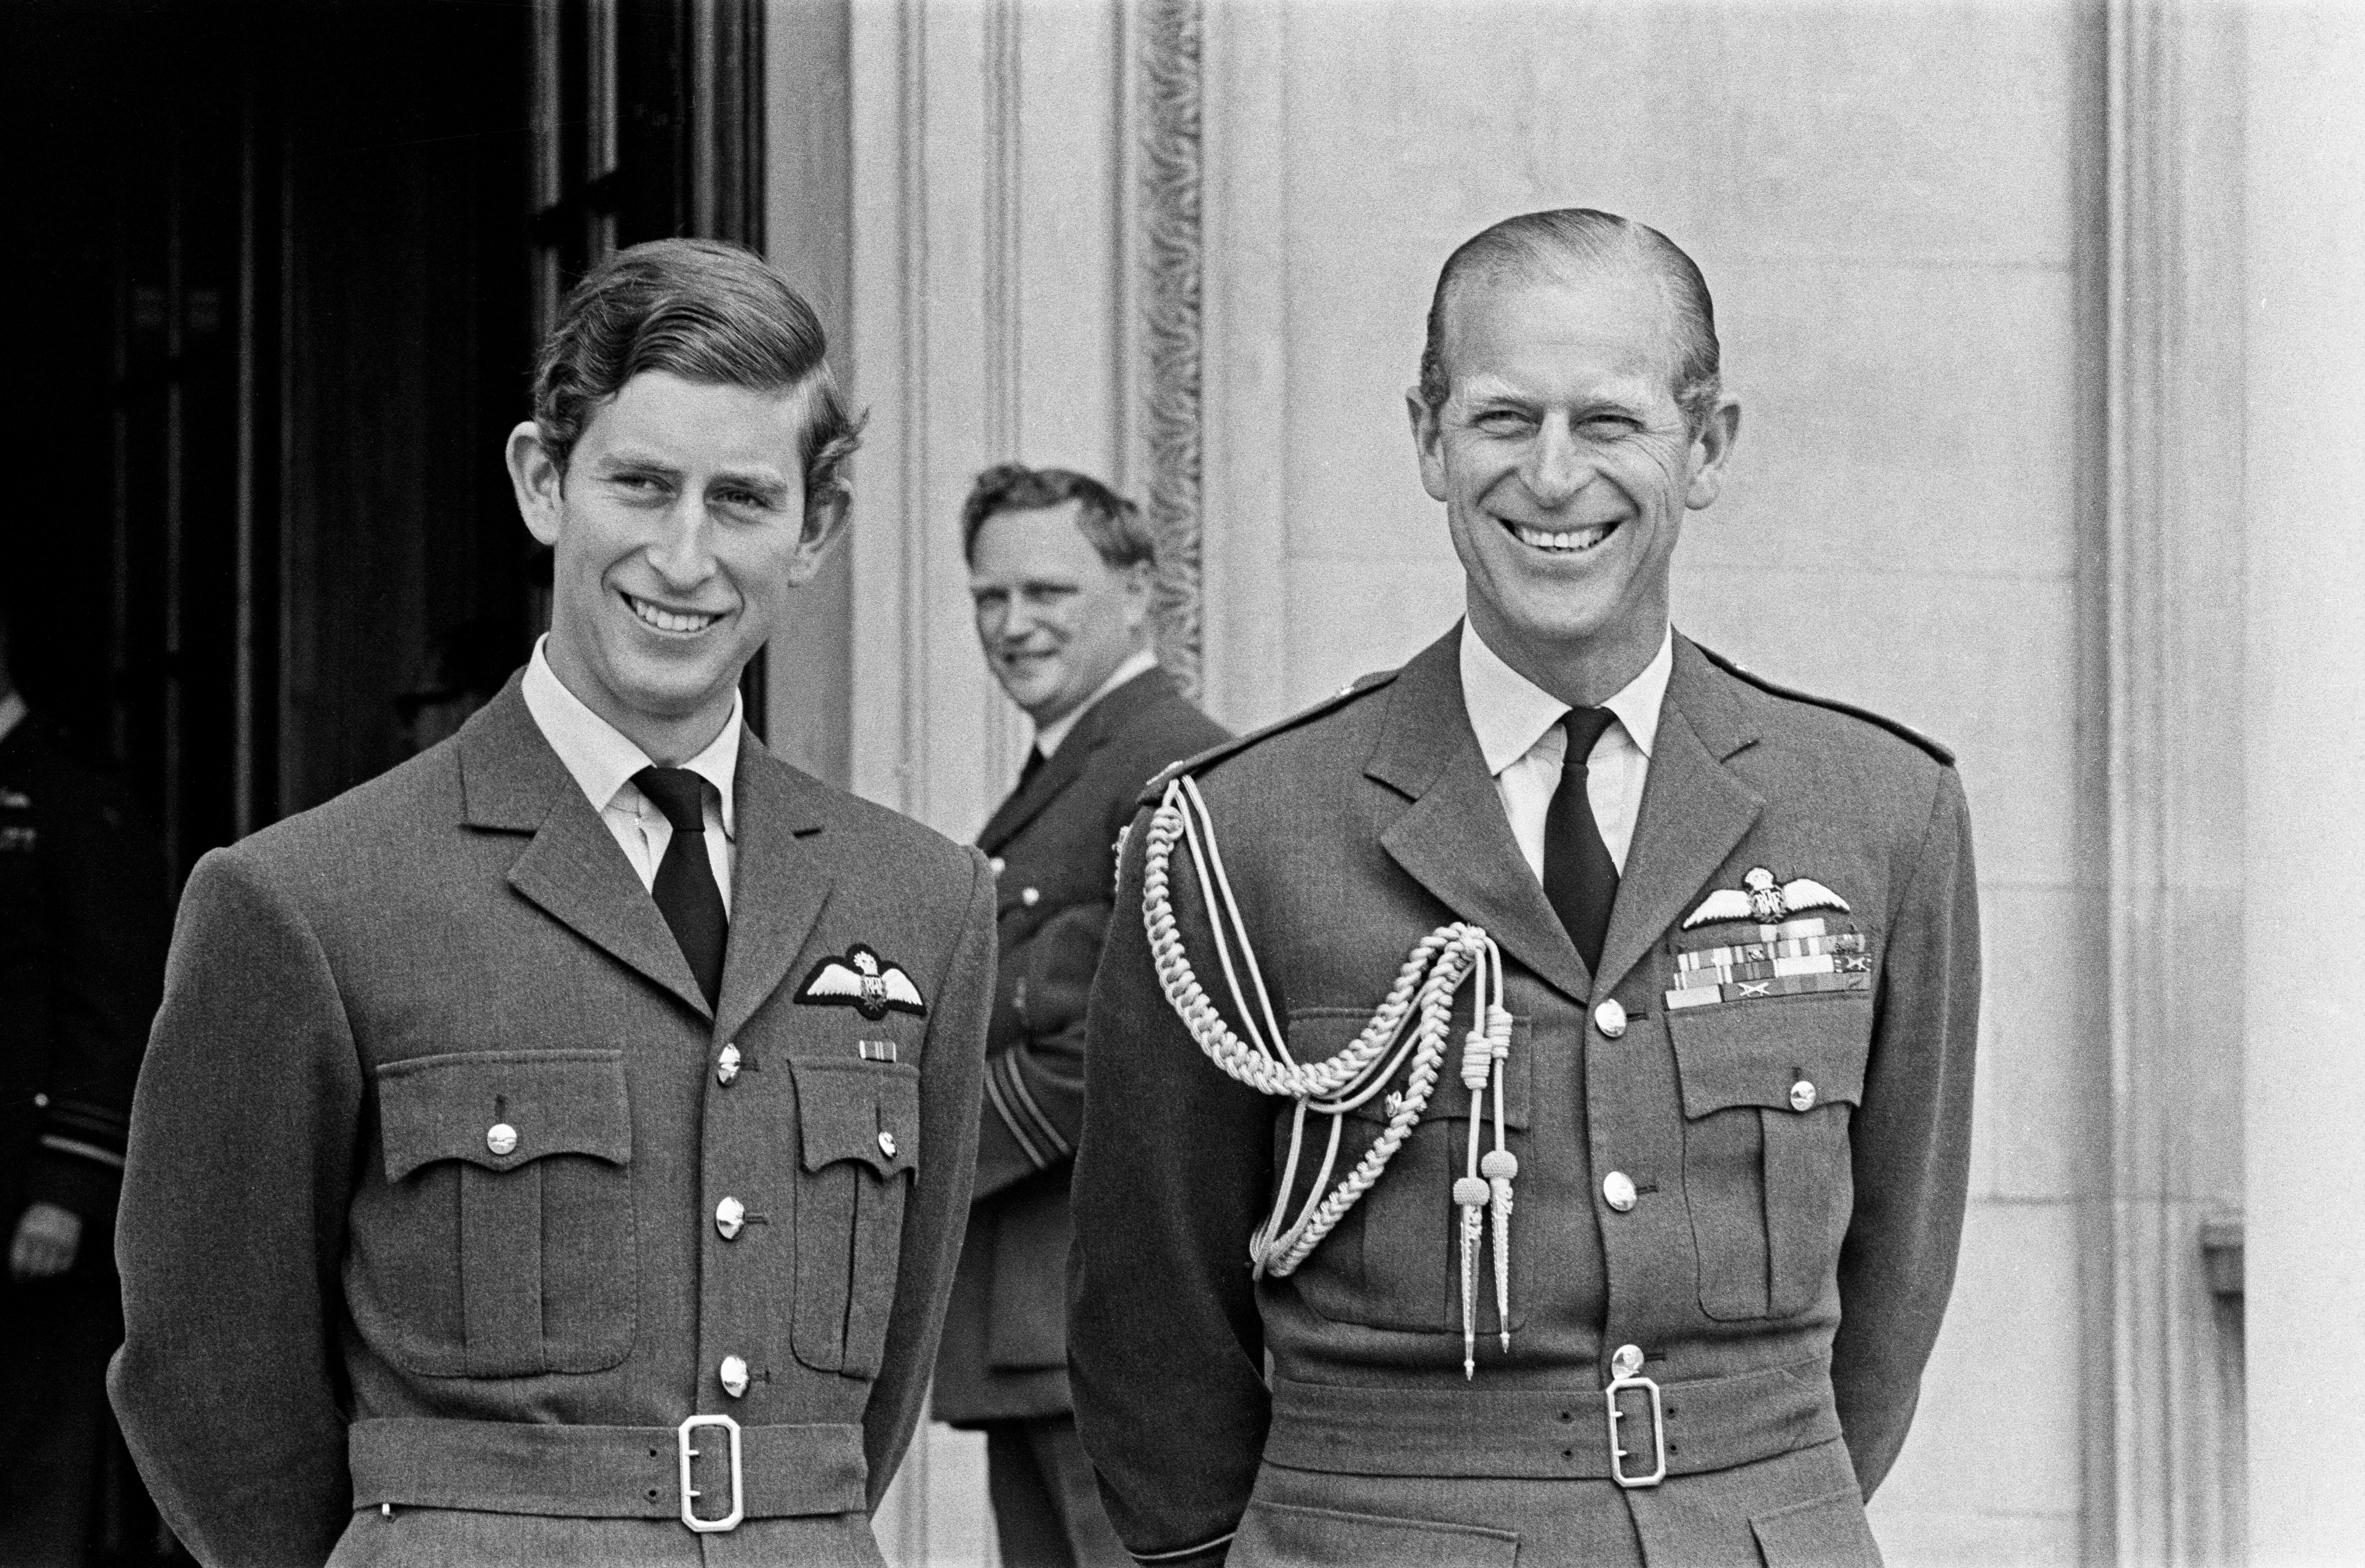 Prince Charles and Prince Philip wearing RAF uniform at the passing out parade at Cranwell in September 1971 | Source: Getty Images